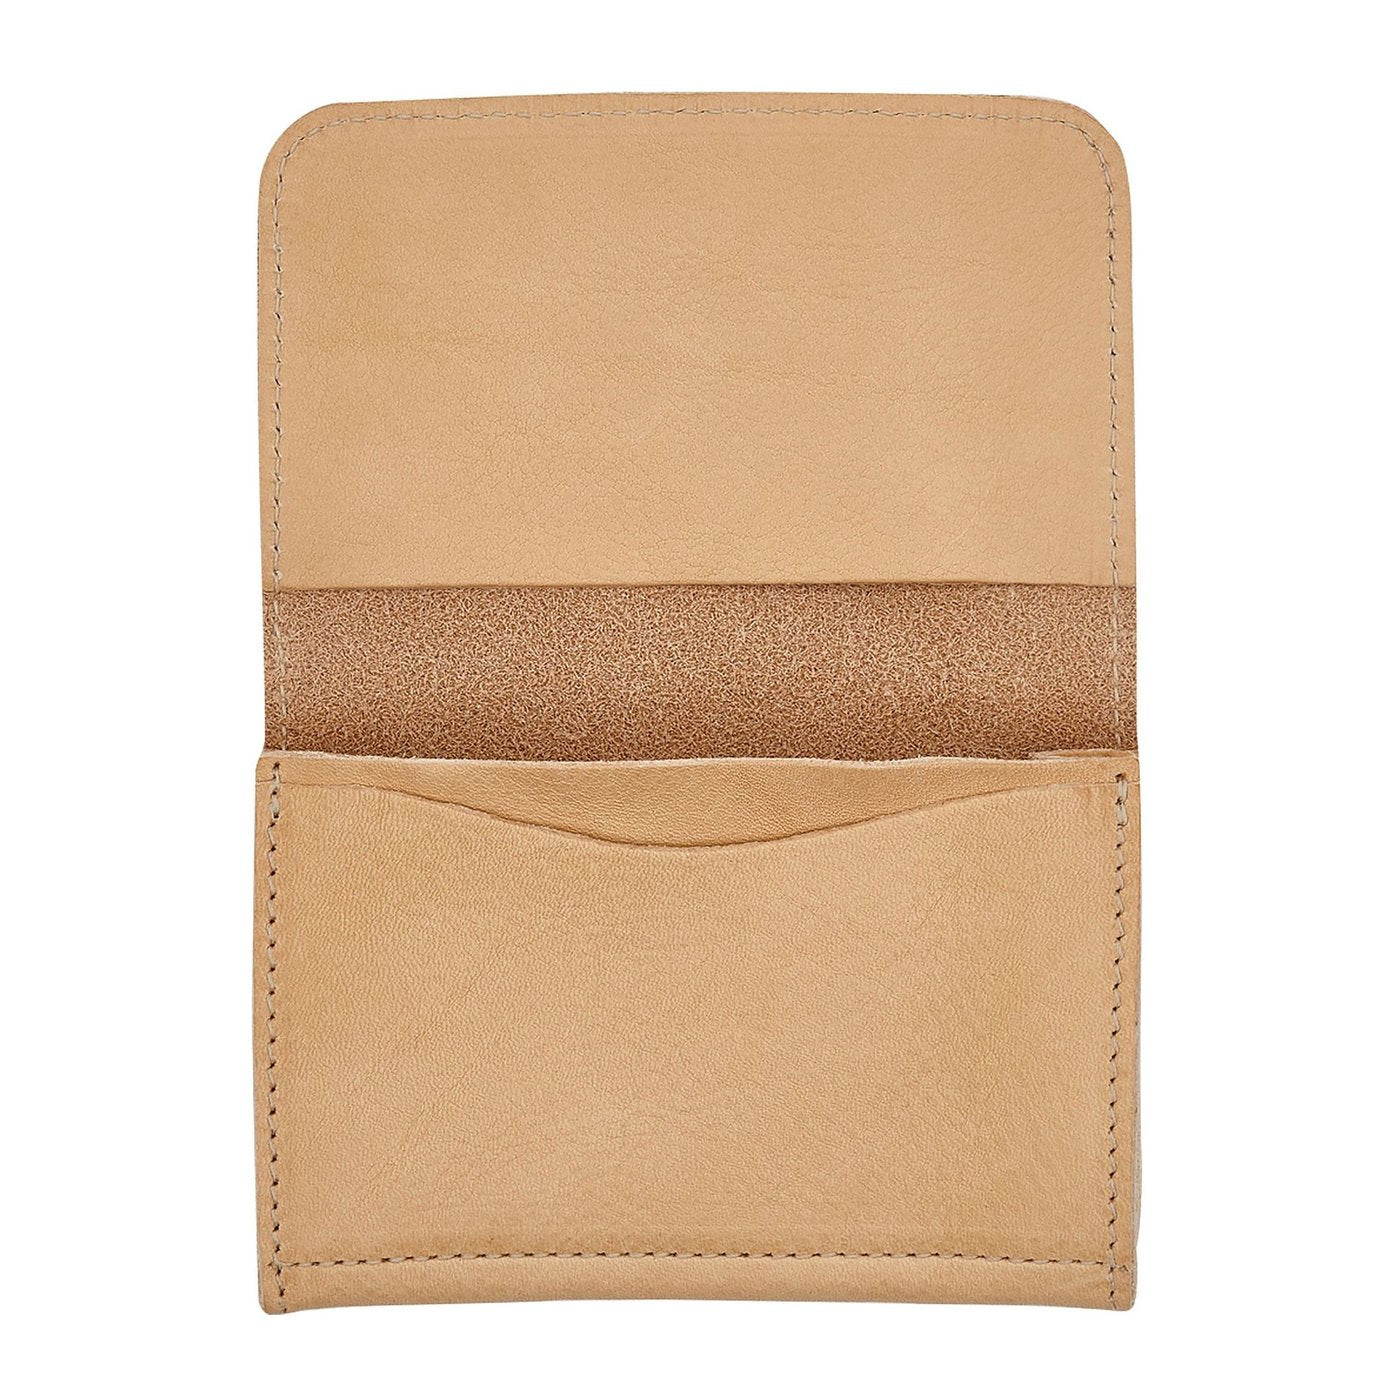 Card case in calf leather color red – Il Bisonte